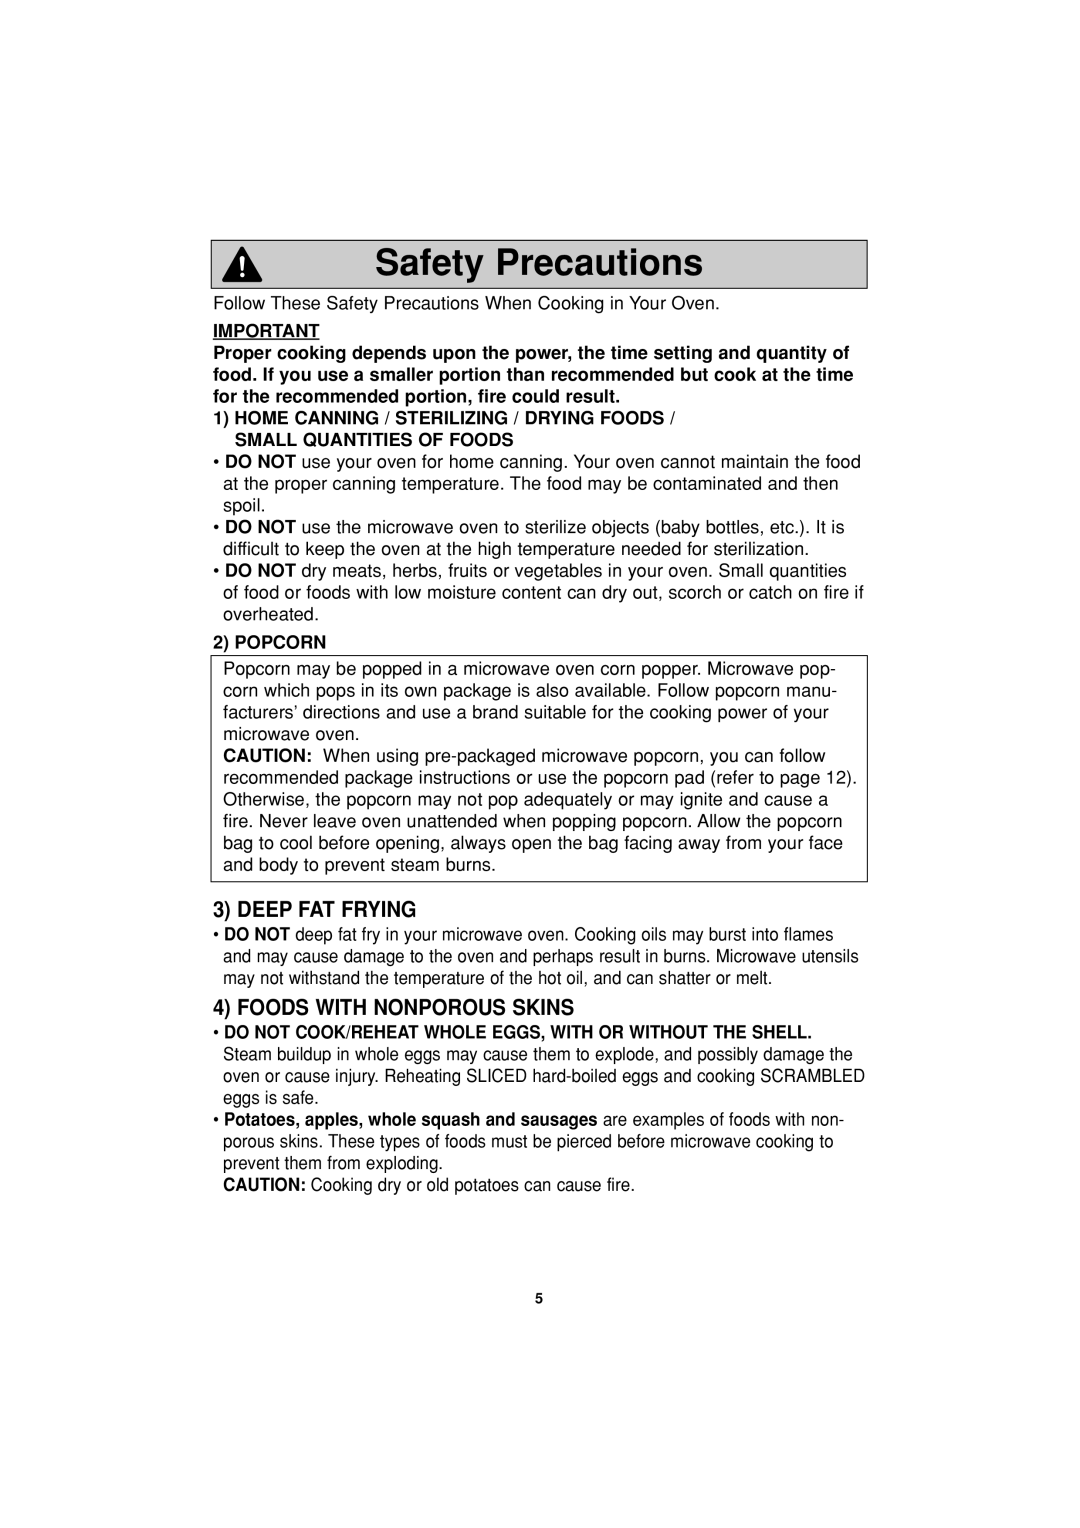 Panasonic NN-S334 important safety instructions Safety Precautions, Deep Fat Frying, Foods With Nonporous Skins 